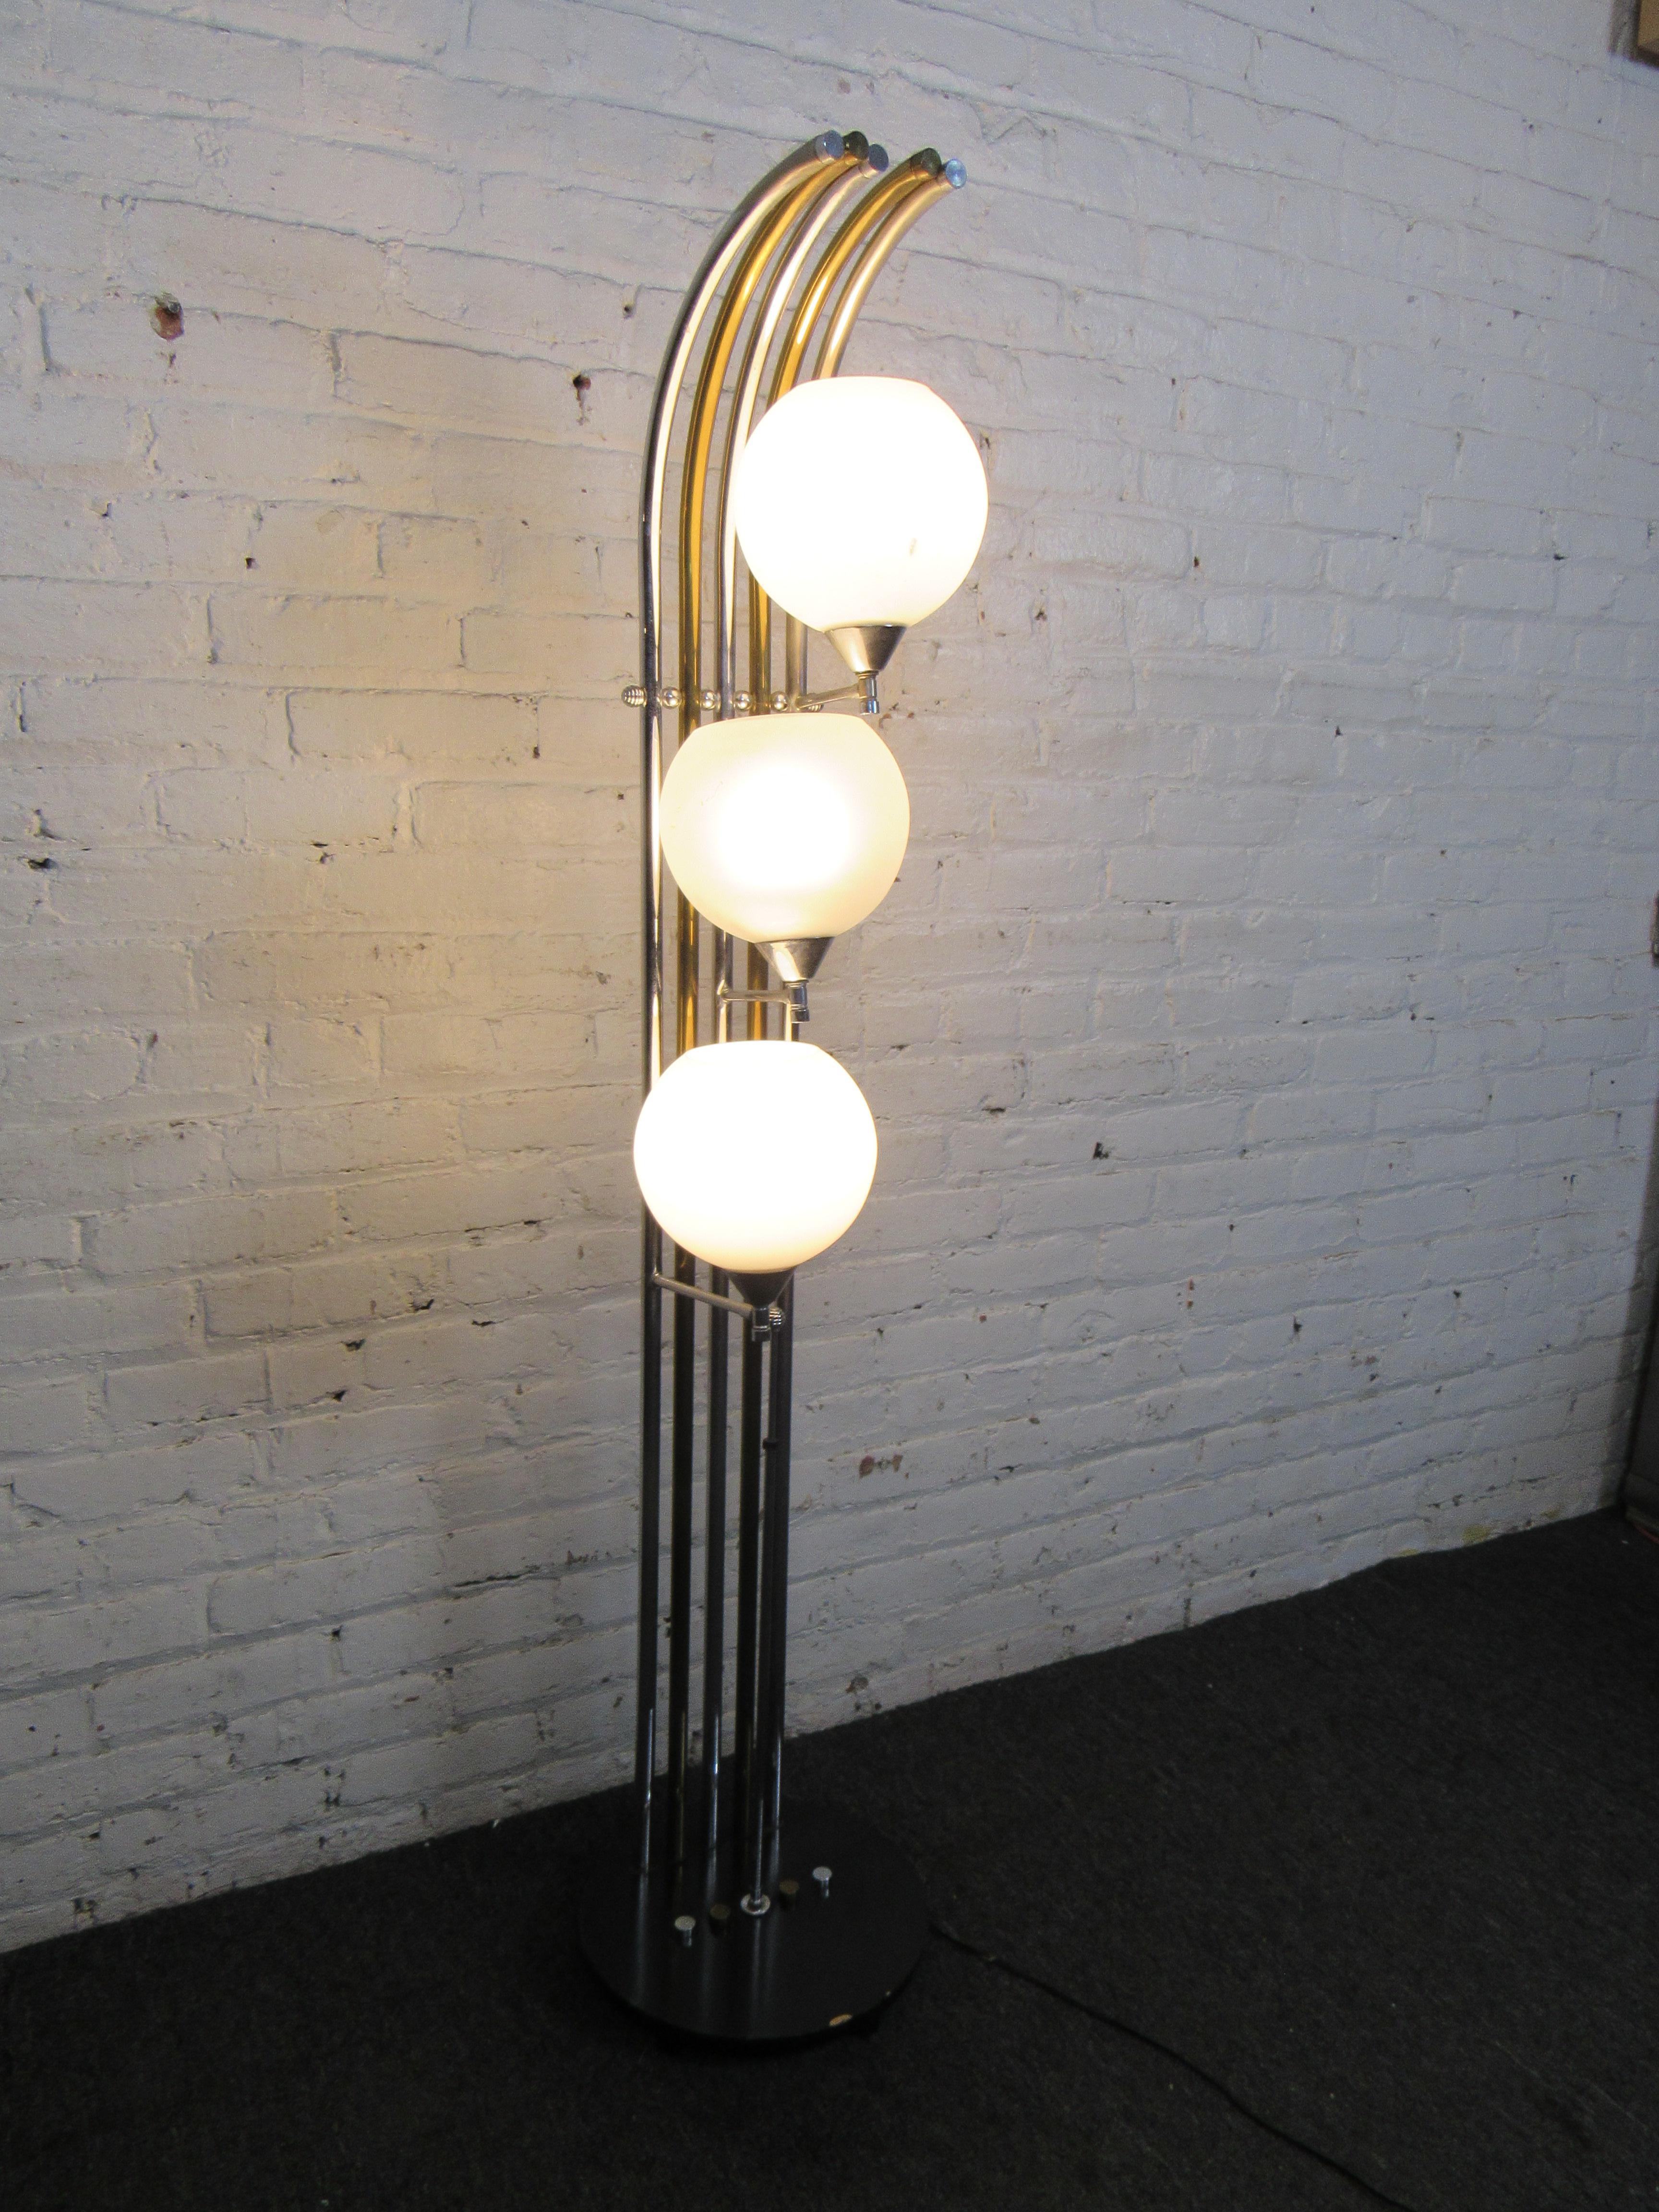 This interesting vintage floor lamp uses mixed metals and three heads for a unique appearance. Please confirm item location with seller (NY/NJ).